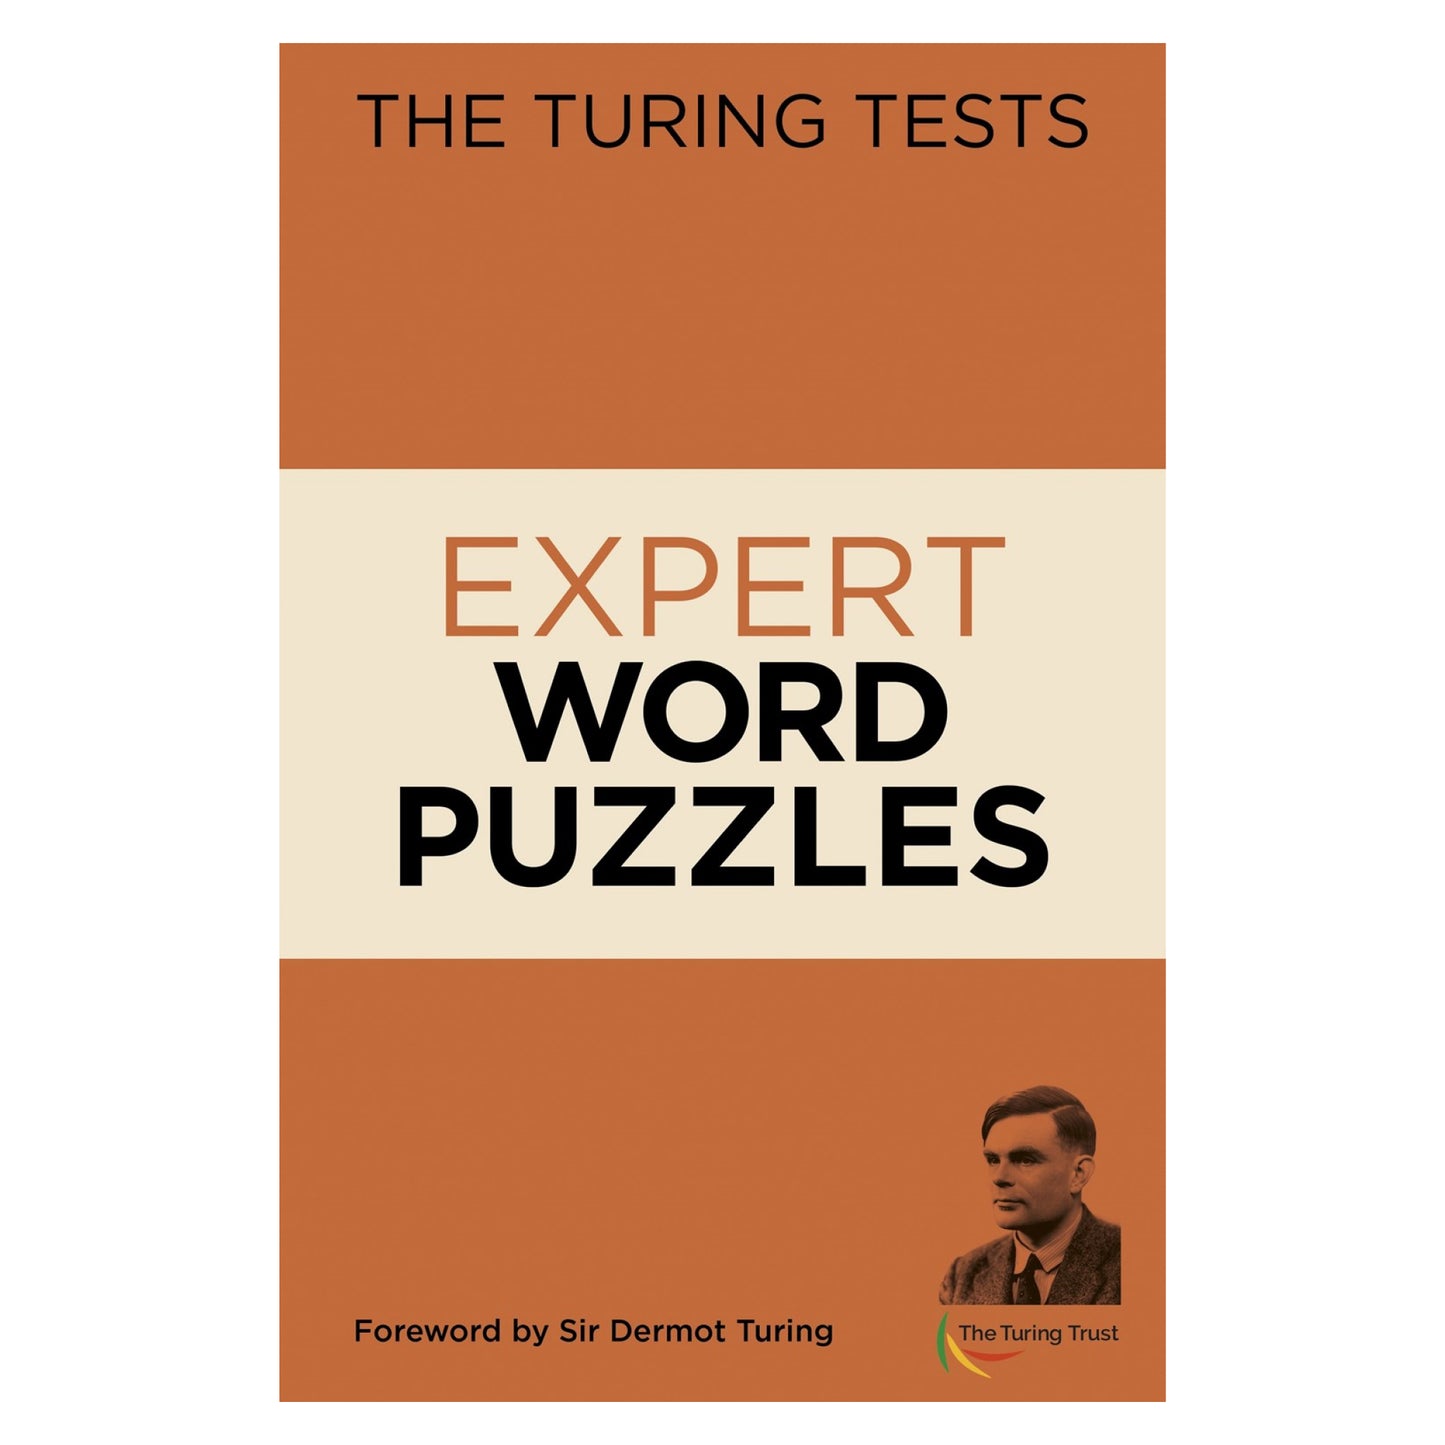 The Turing Tests: Expert Word Puzzles